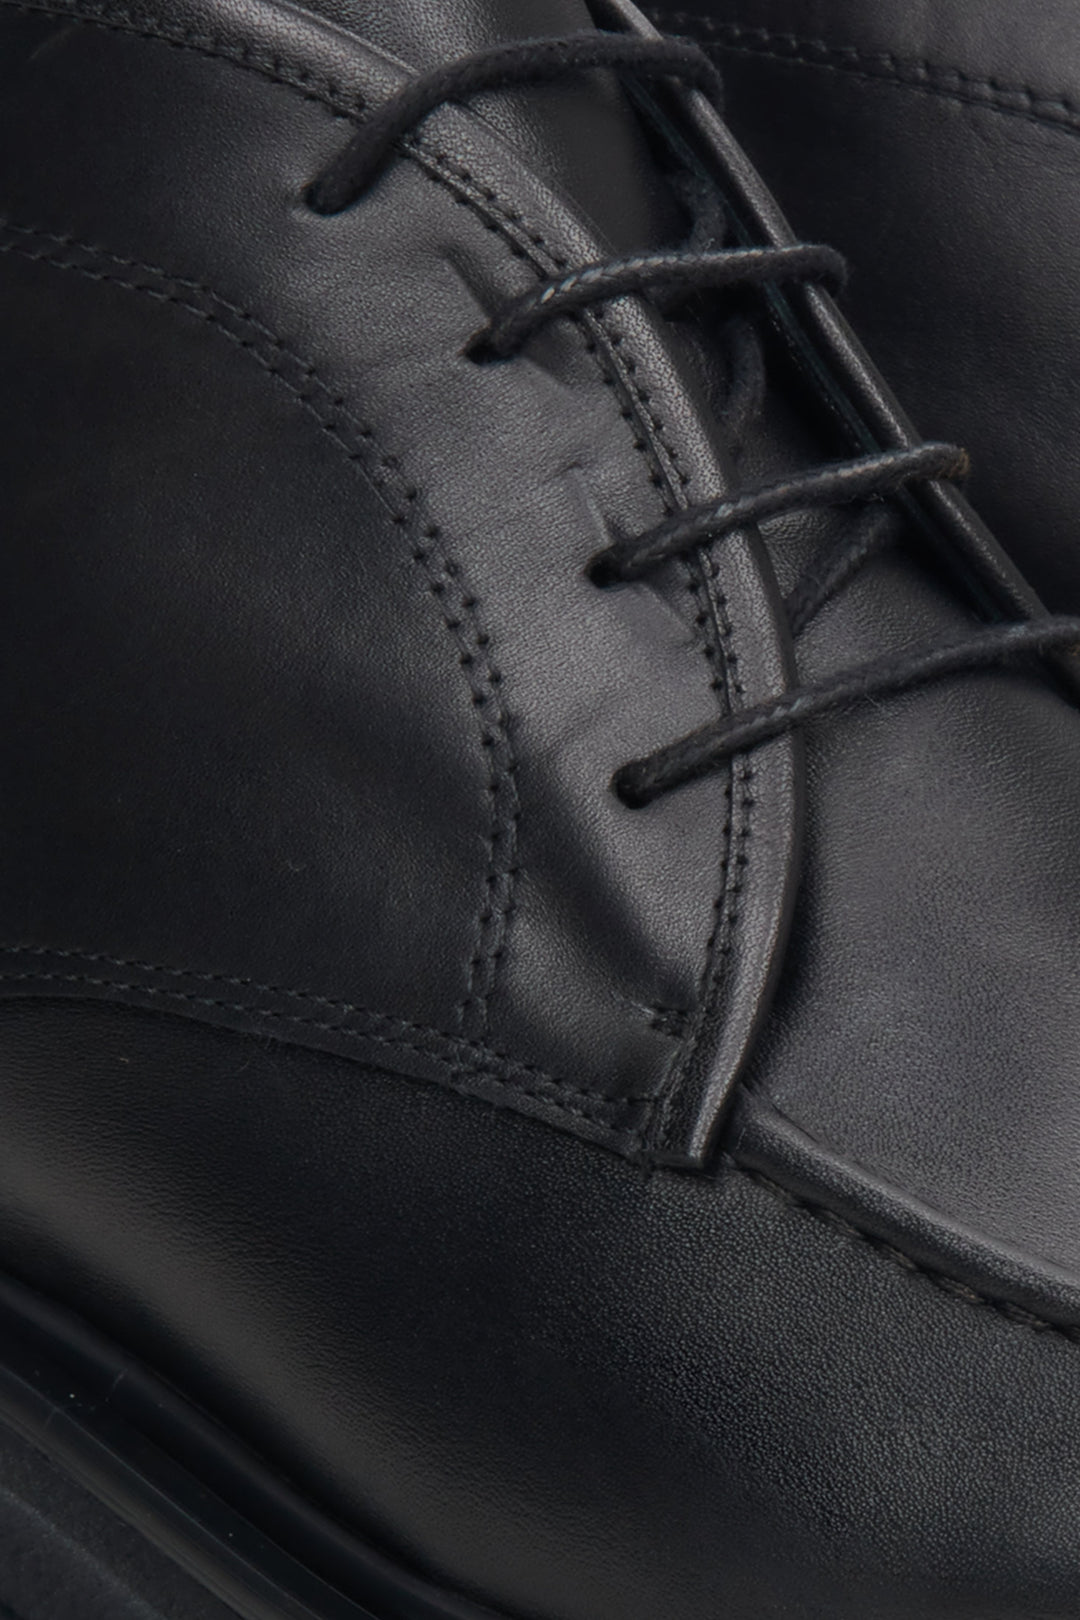 Lace-up women's black leather  boots by Estro - close-up on the detail.